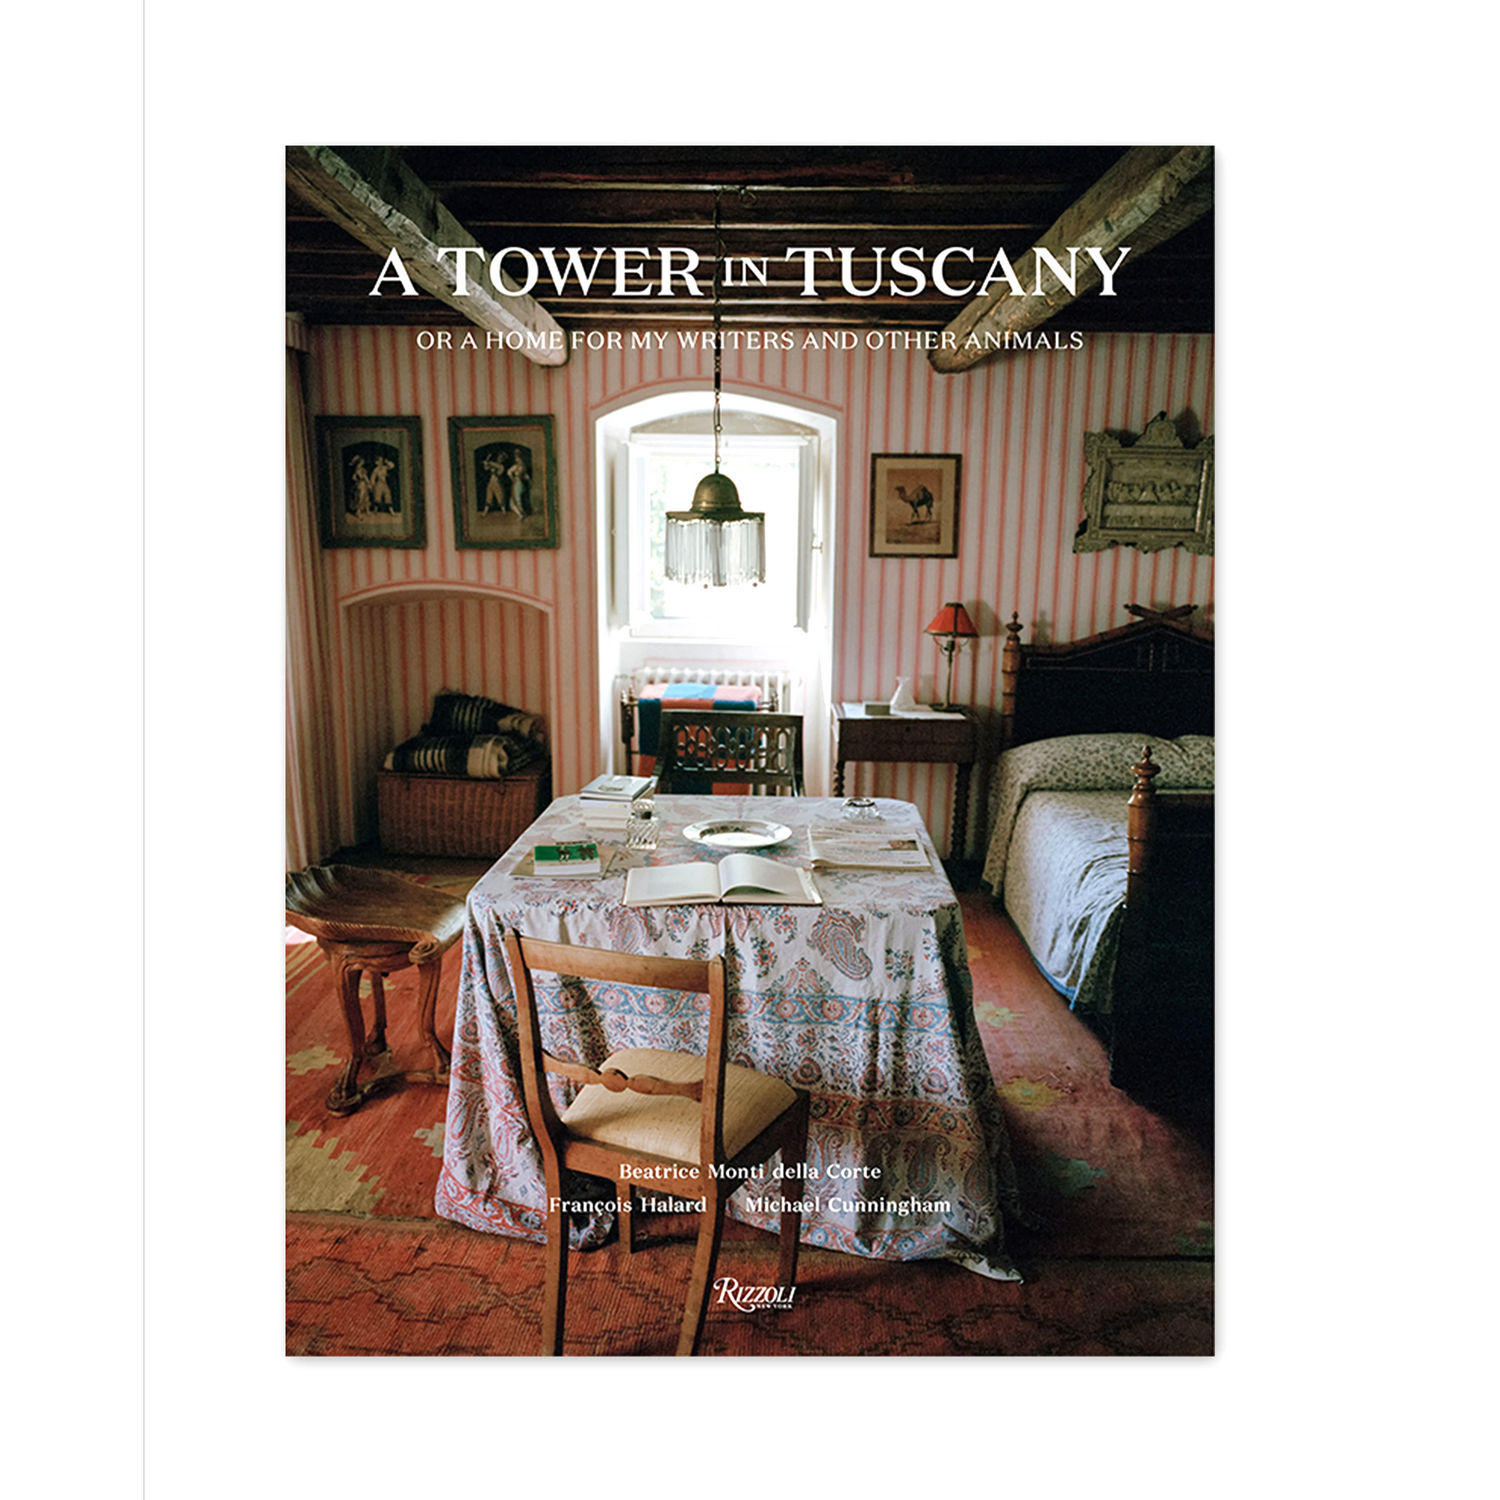 Livro A Tower in Tuscany: Or a Home for My Writers and Other Animals